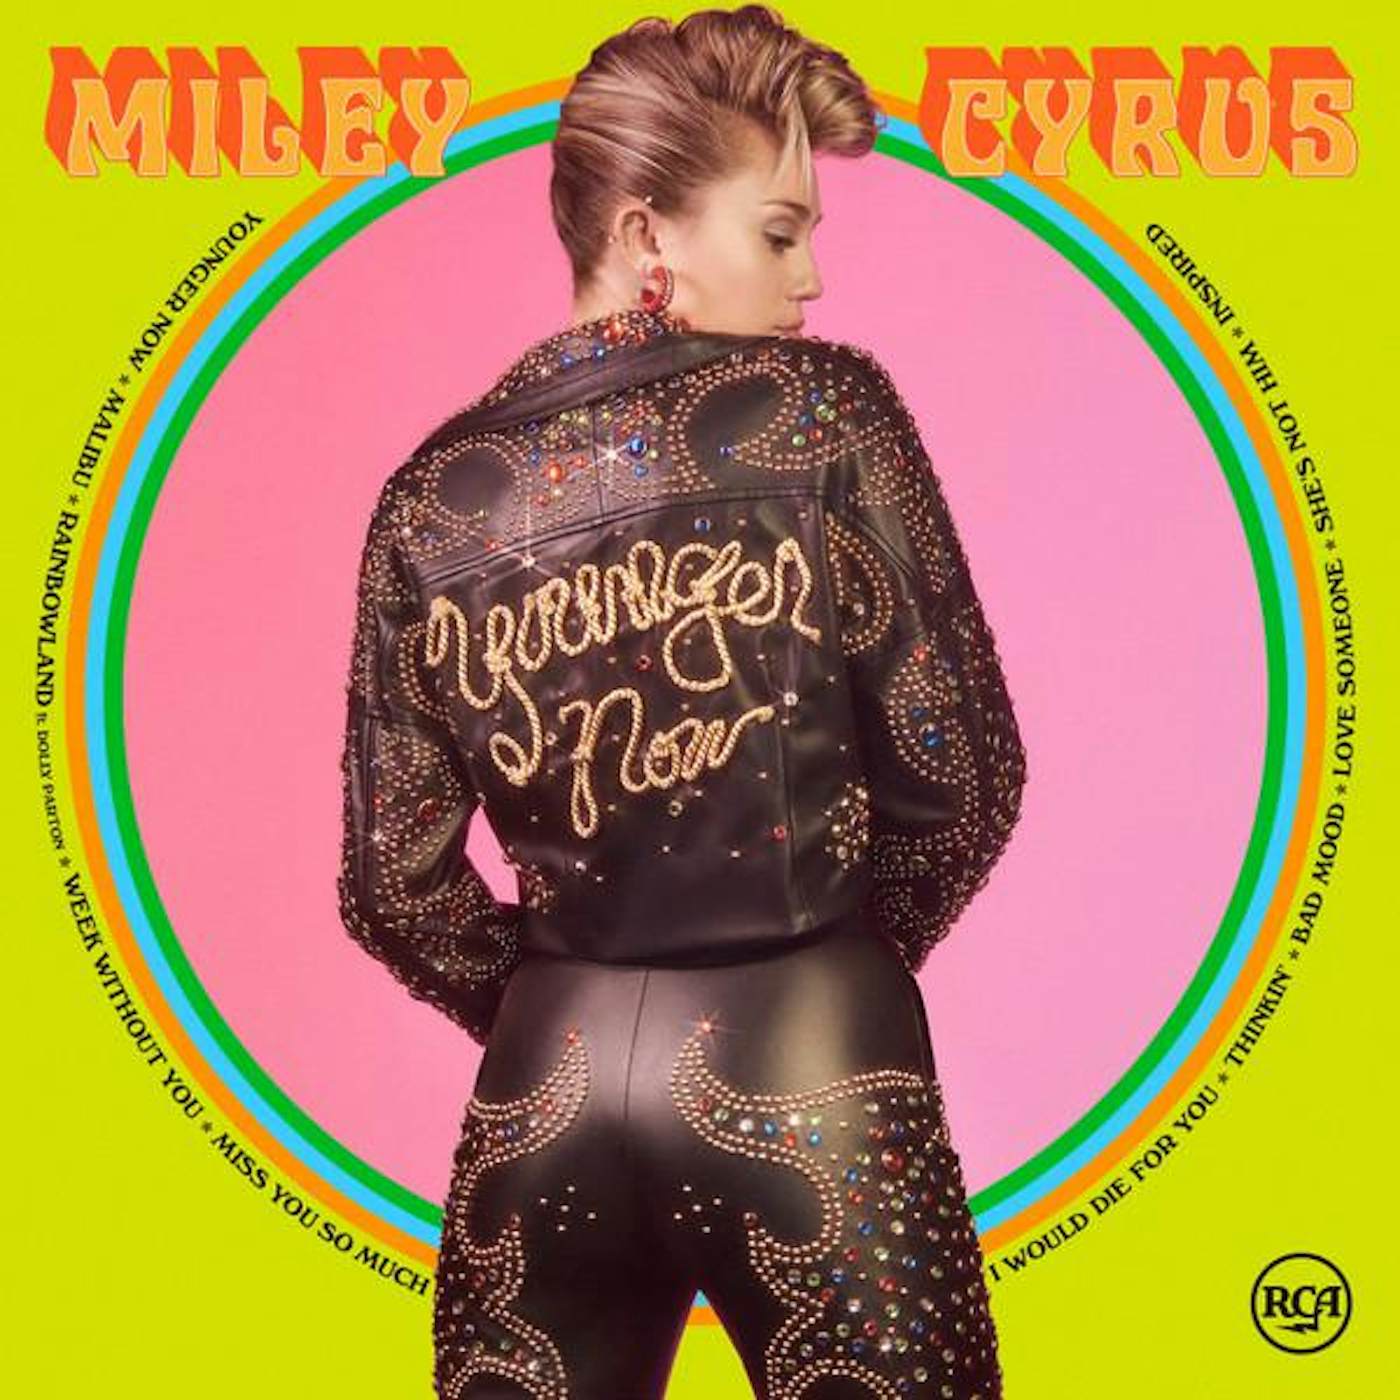 Miley Cyrus Used to Be Young 7 Black Vinyl